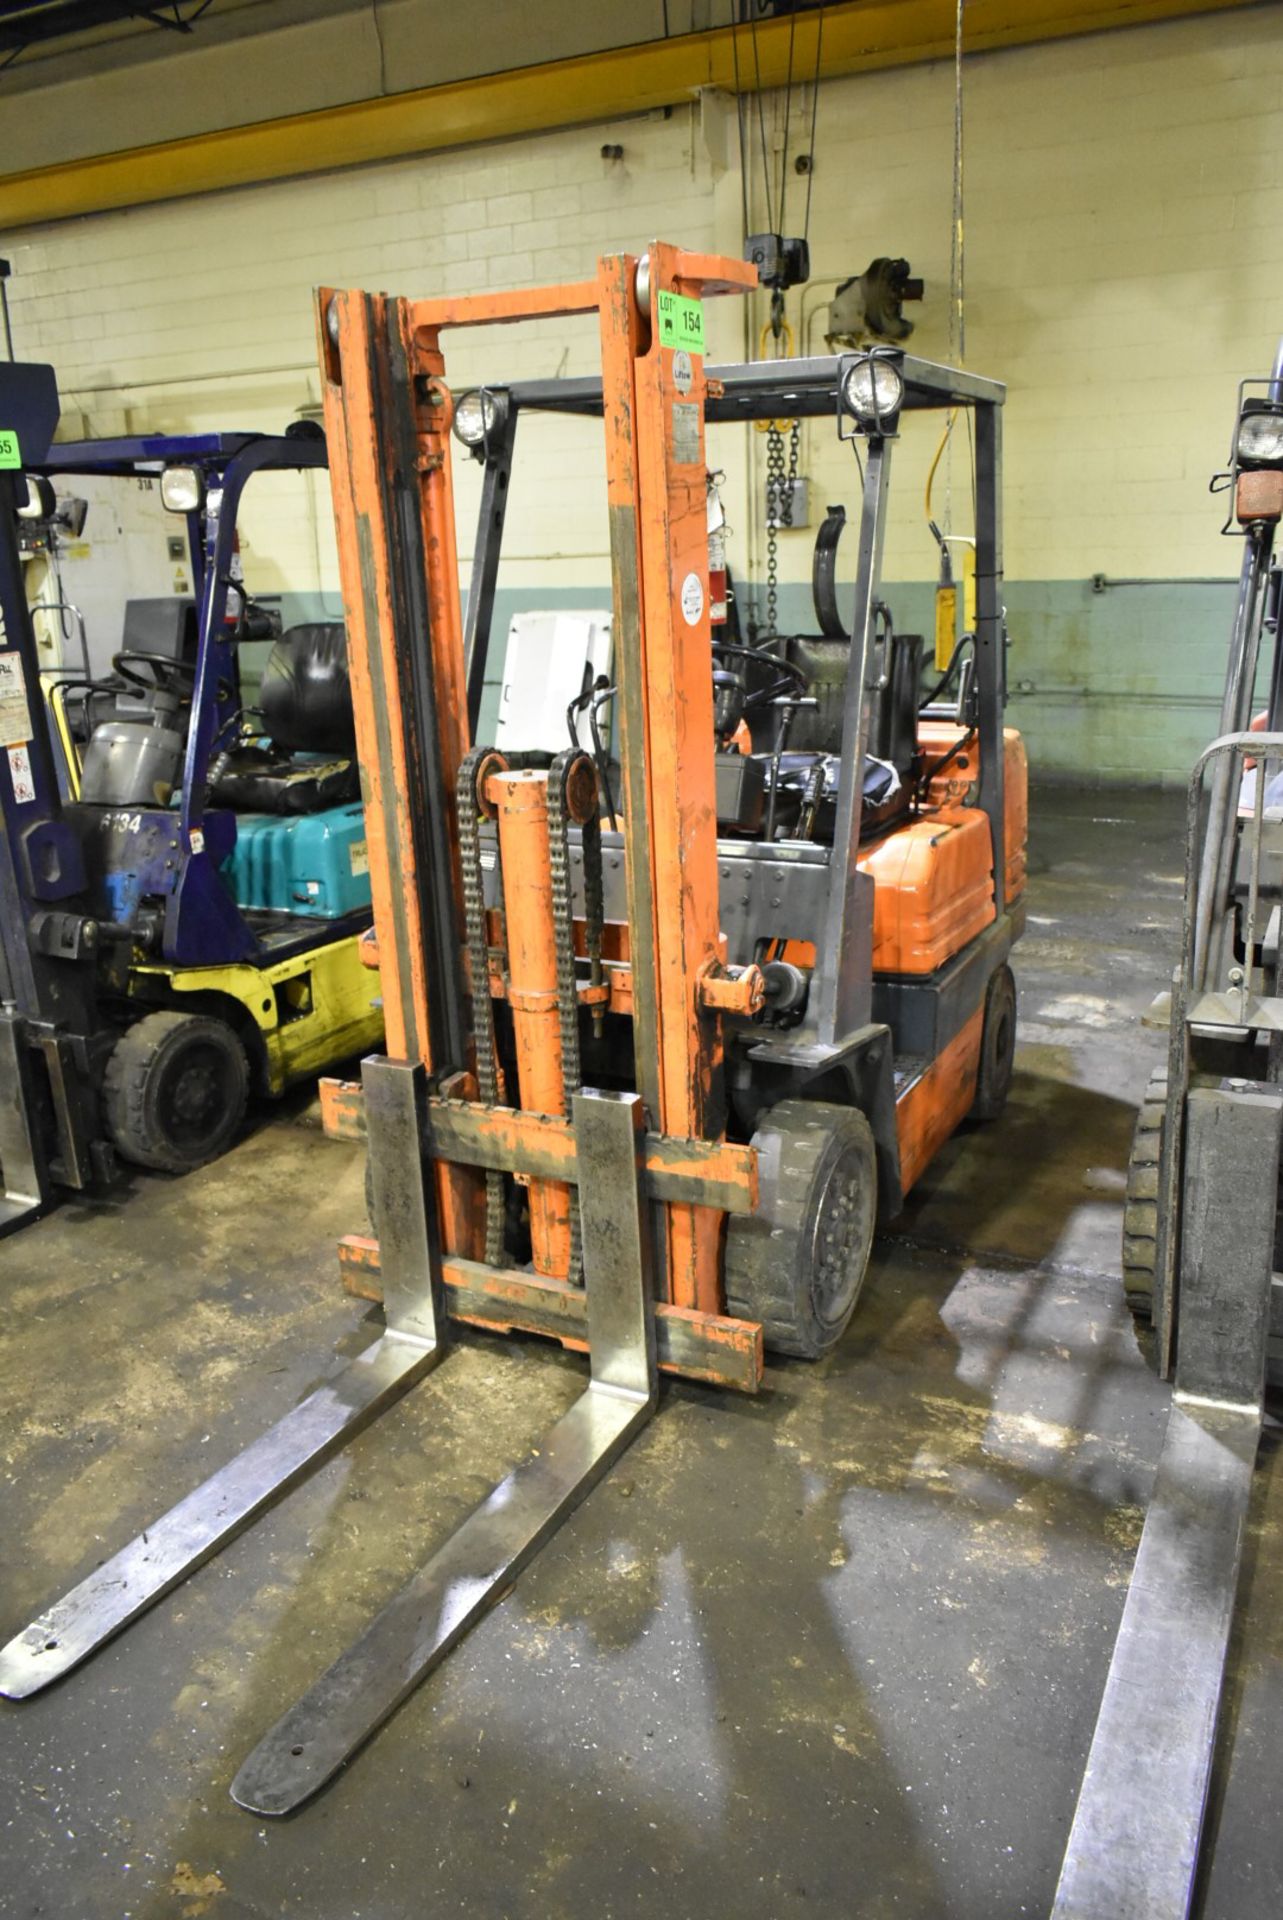 TOYOTA 5FGC25 LPG FORKLIFT WITH 4700LBS MAX CAPACITY, 188" 2-STAGE HIGH VISIBILITY MAST, CUSHION